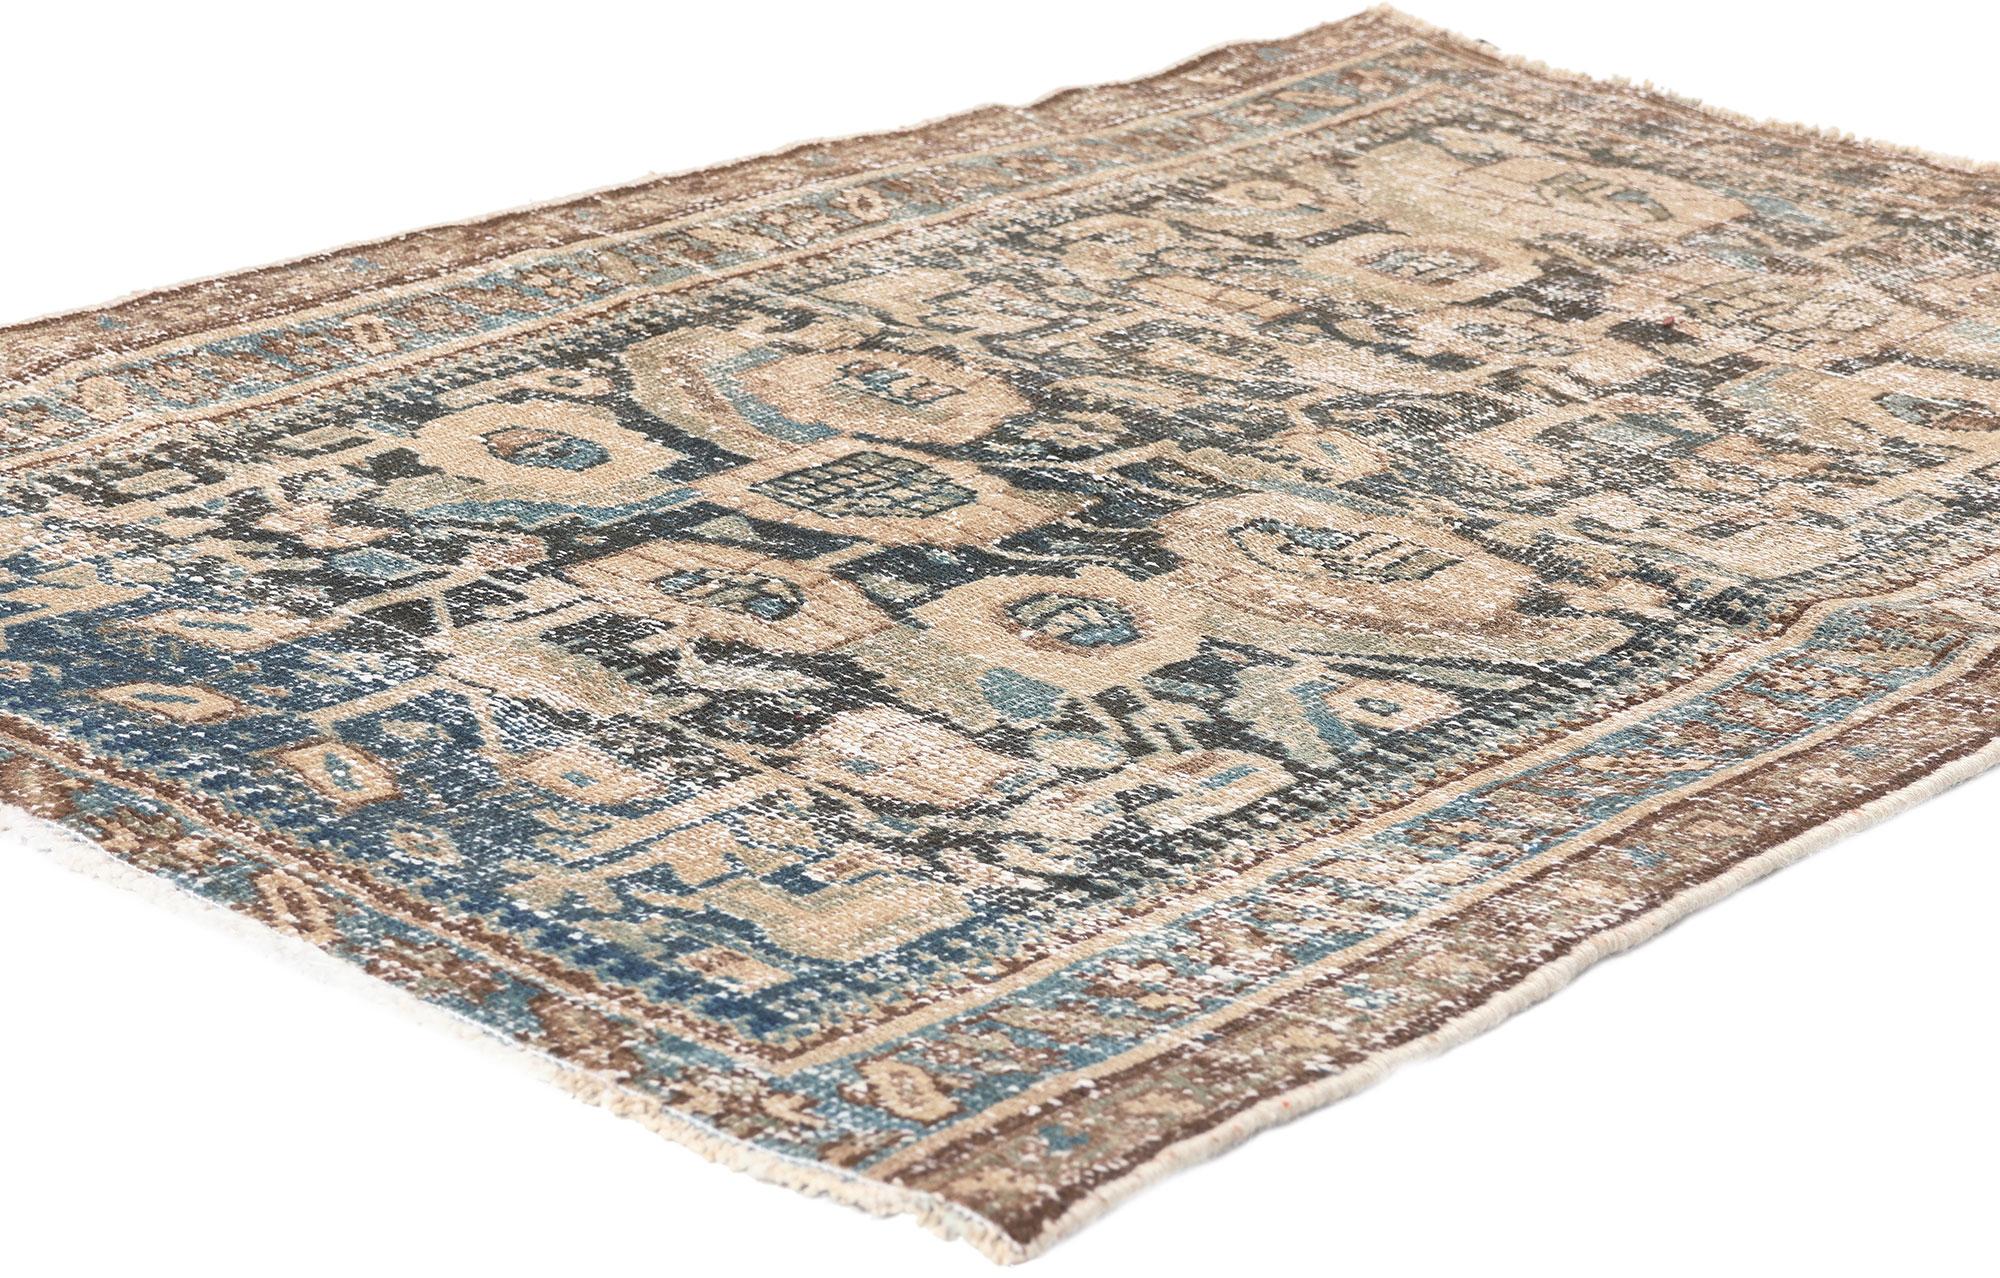 61270 Antique-Worn Persian Hamadan Rug, 02'08 x 03'11.
Weathered finesse meets natural elegance in this hand knotted wool distressed antique-worn Persian Hamadan rug.

Rendered in variegated shades of blue, brown, cerulean, tan, Aegean, sand,